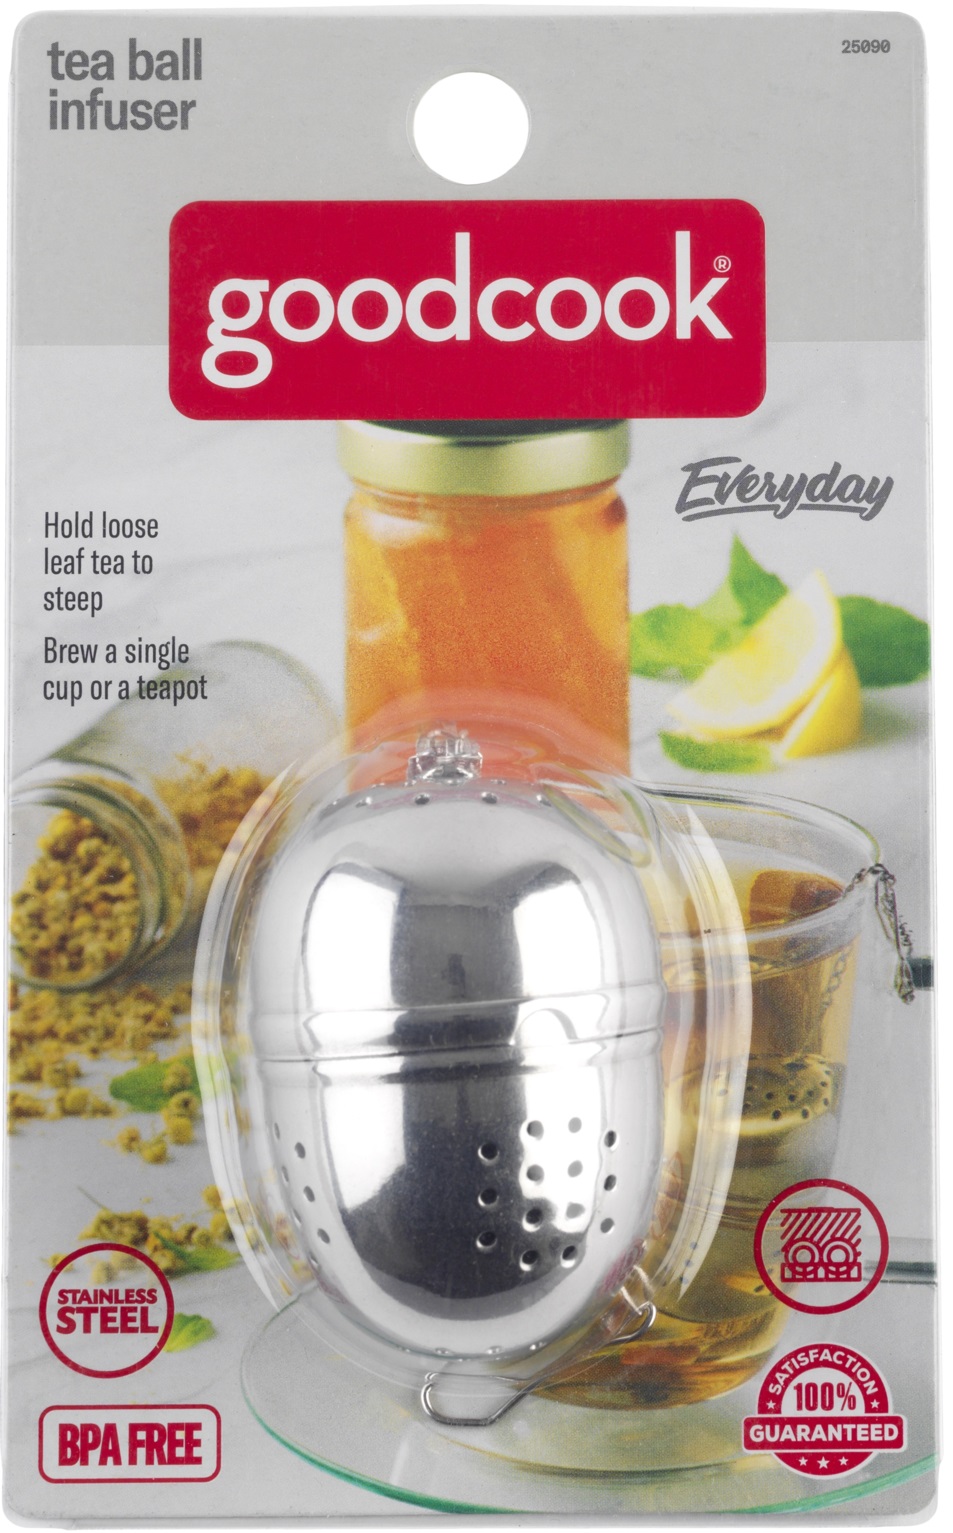 25090_GoodCook_Everyday_Tea Ball Infuser_Packaging 1.psd